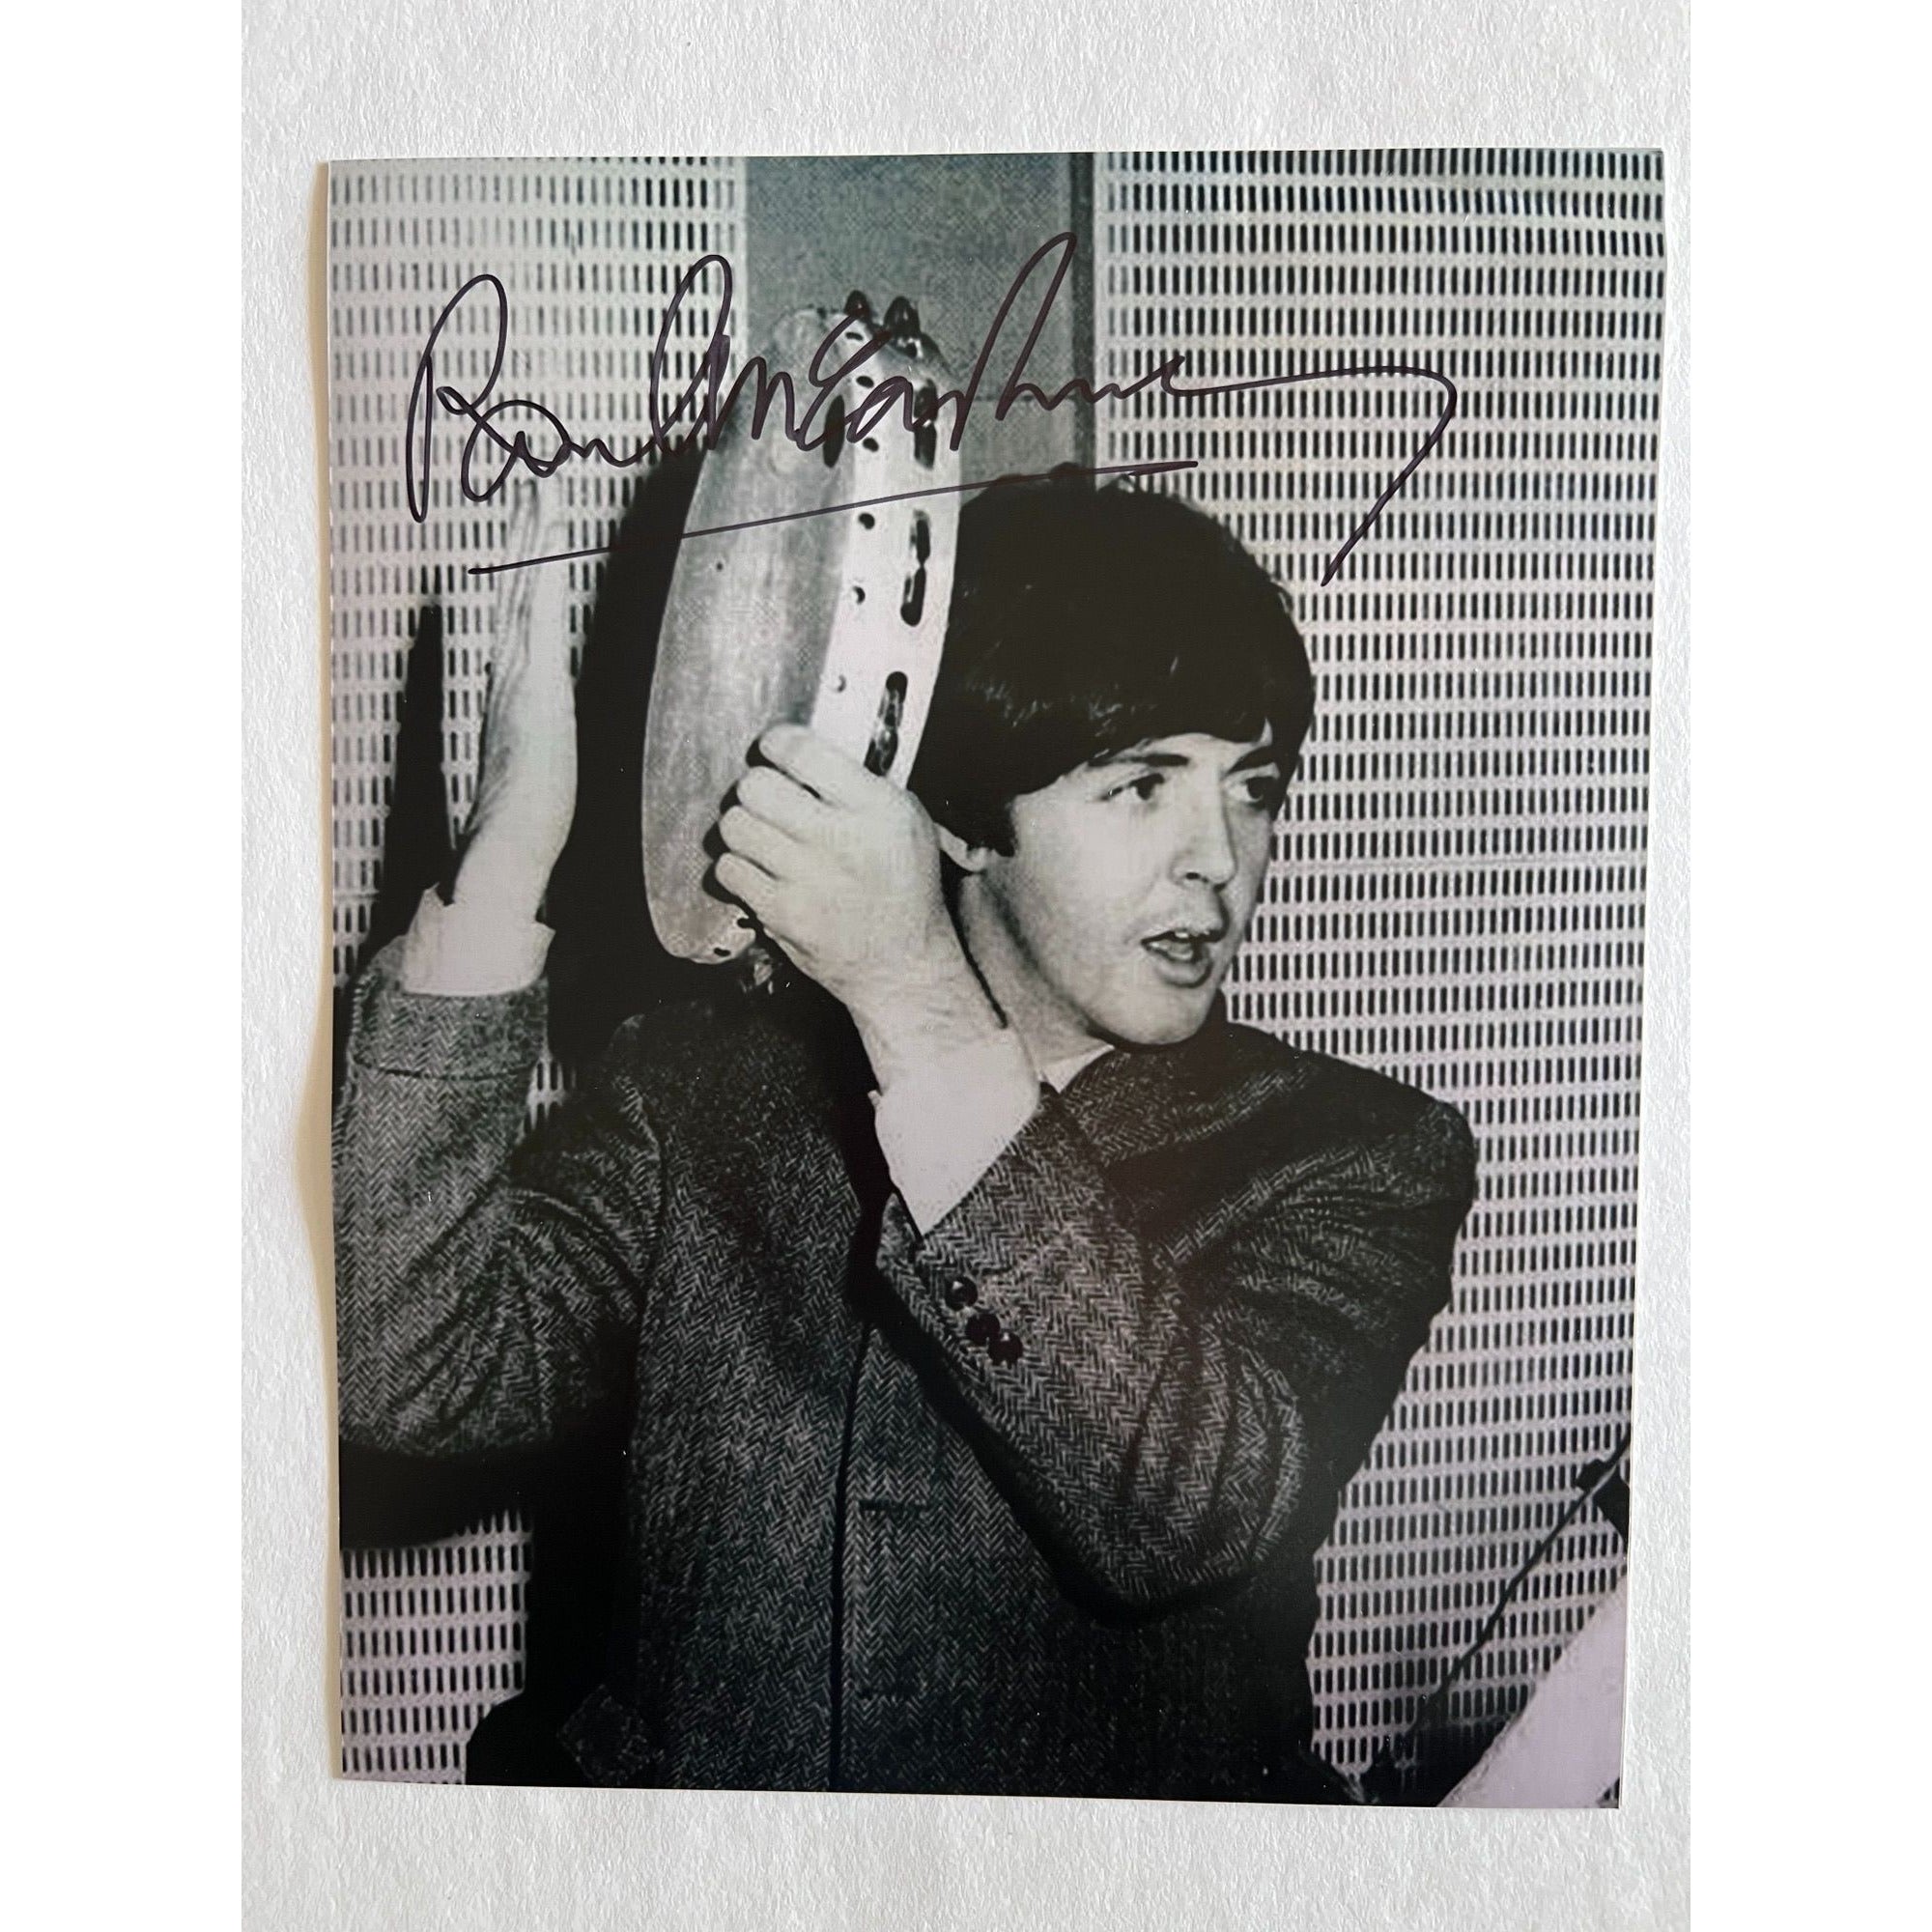 Paul McCartney 8x10 photo signed with proof